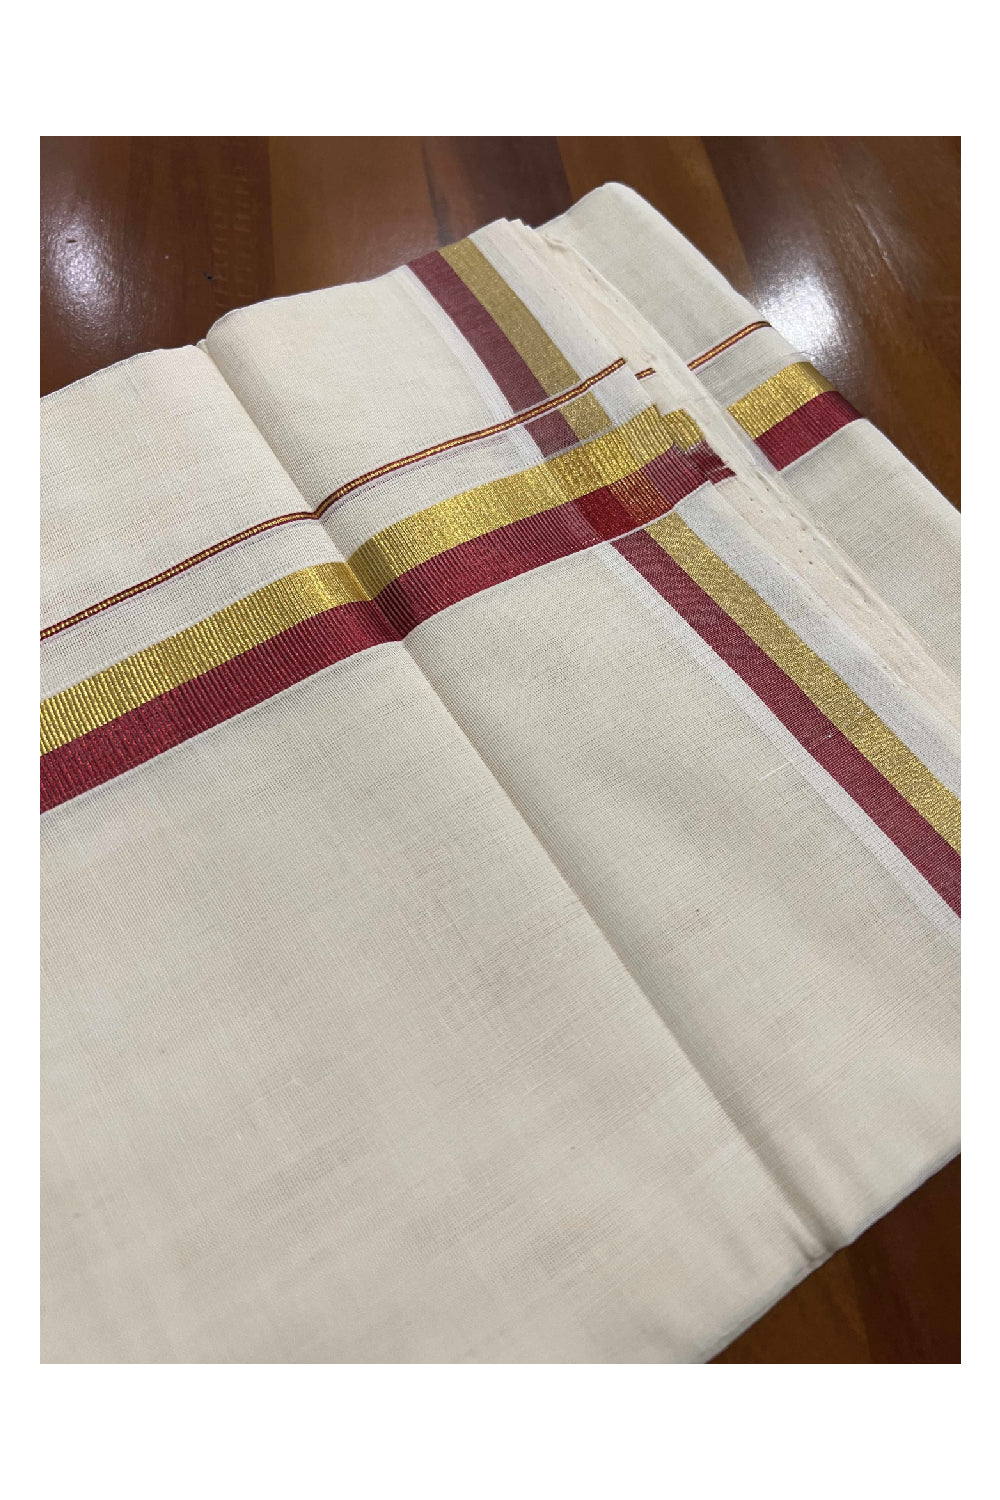 Southloom Kuthampully Pure Cotton Handloom Mundu with Golden and Red Kasavu Border